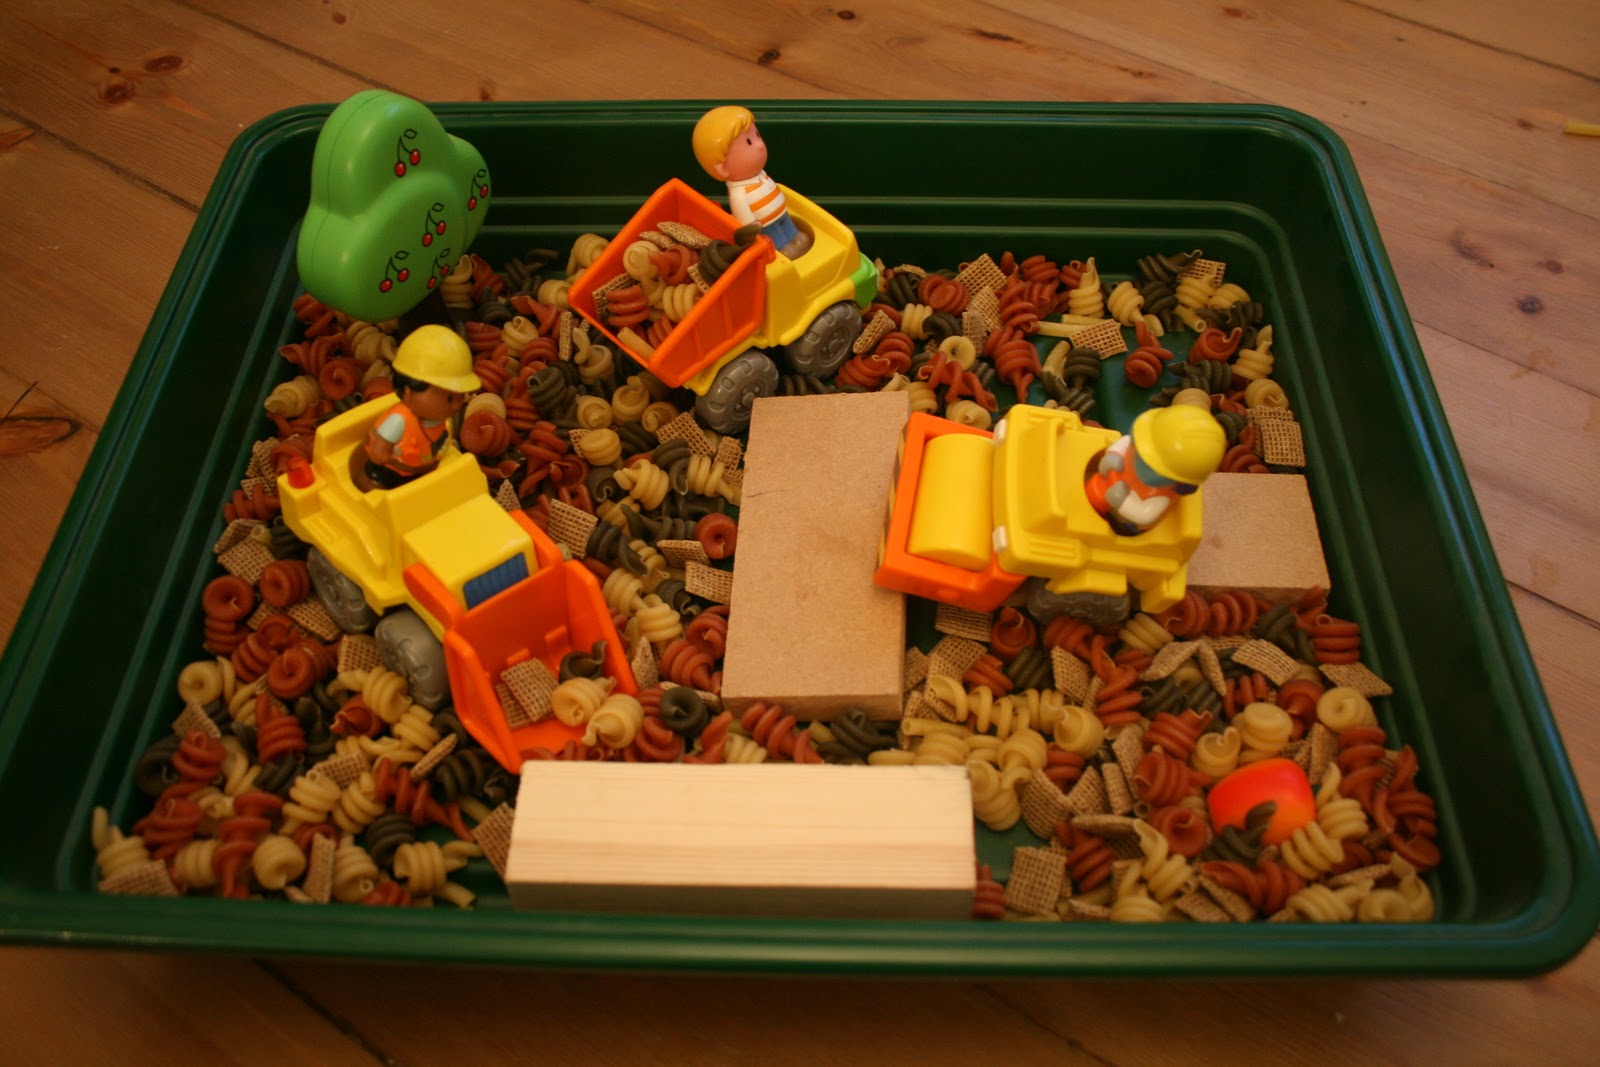 Small World Play: Construction Site - The Imagination Tree